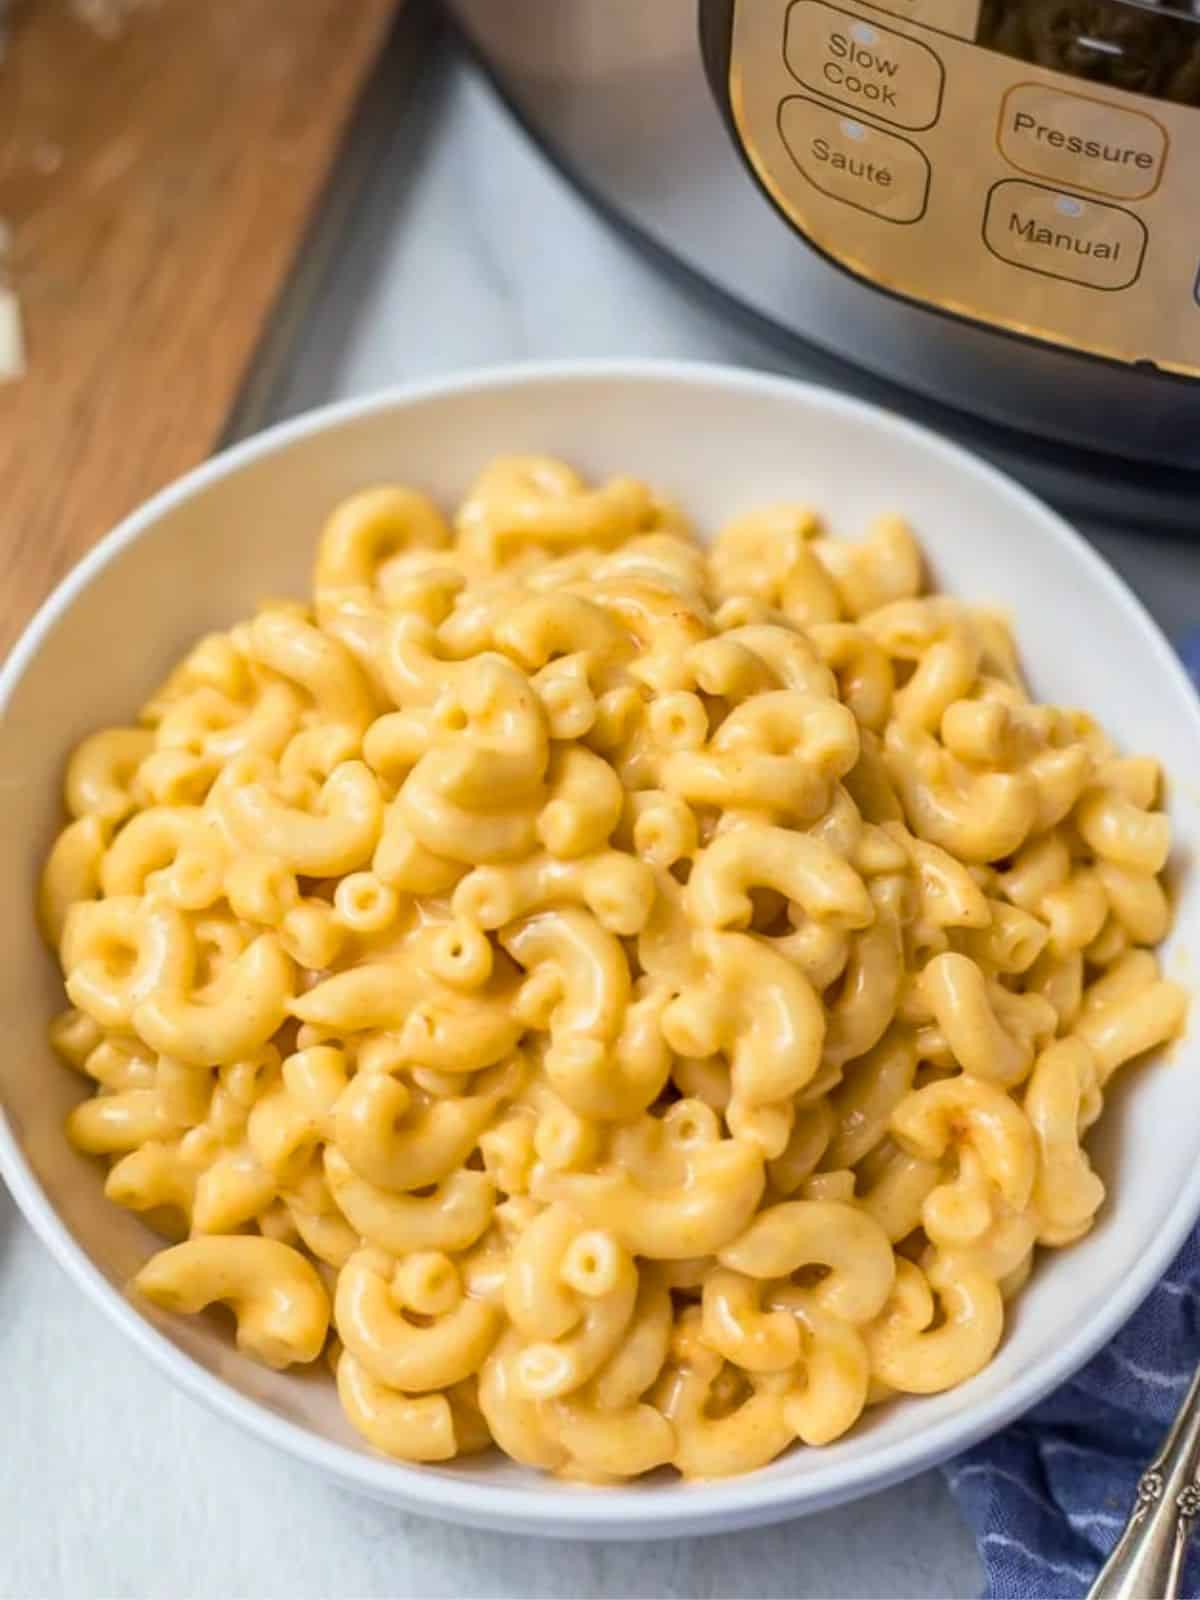 Bowl of cheesy, creamy Instant Pot Macaroni and cheese next to pressure cooker.